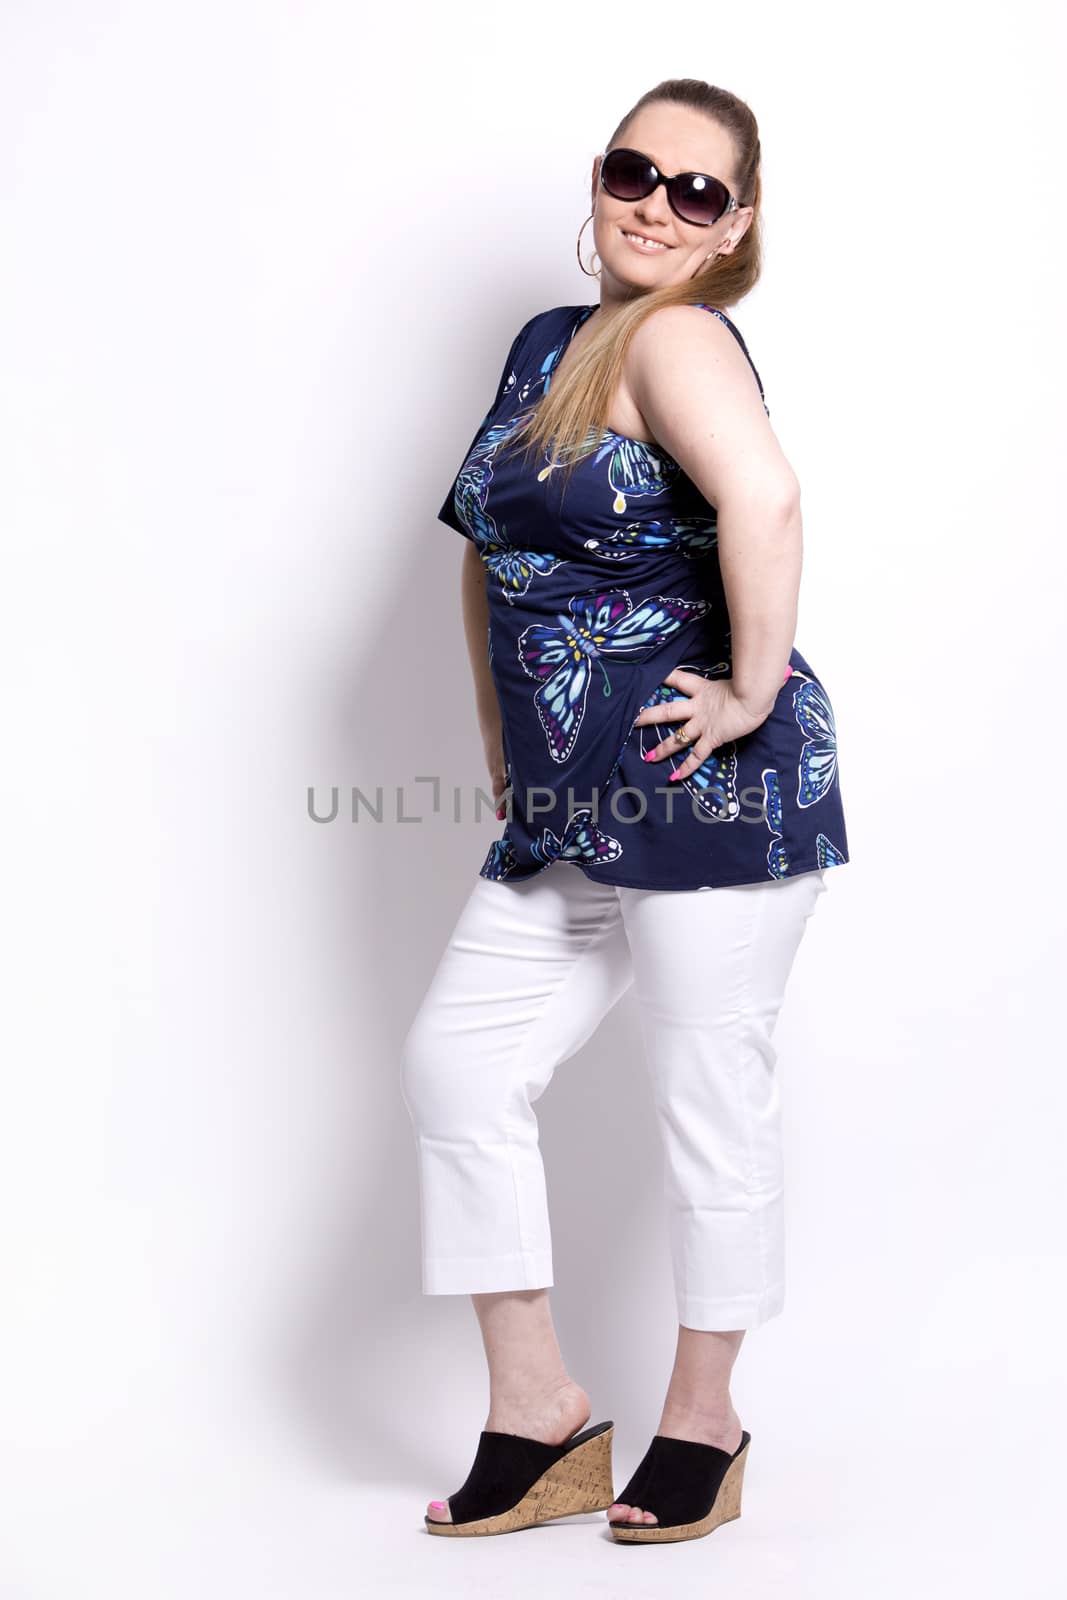 blond woman wearing summer outfit on white background